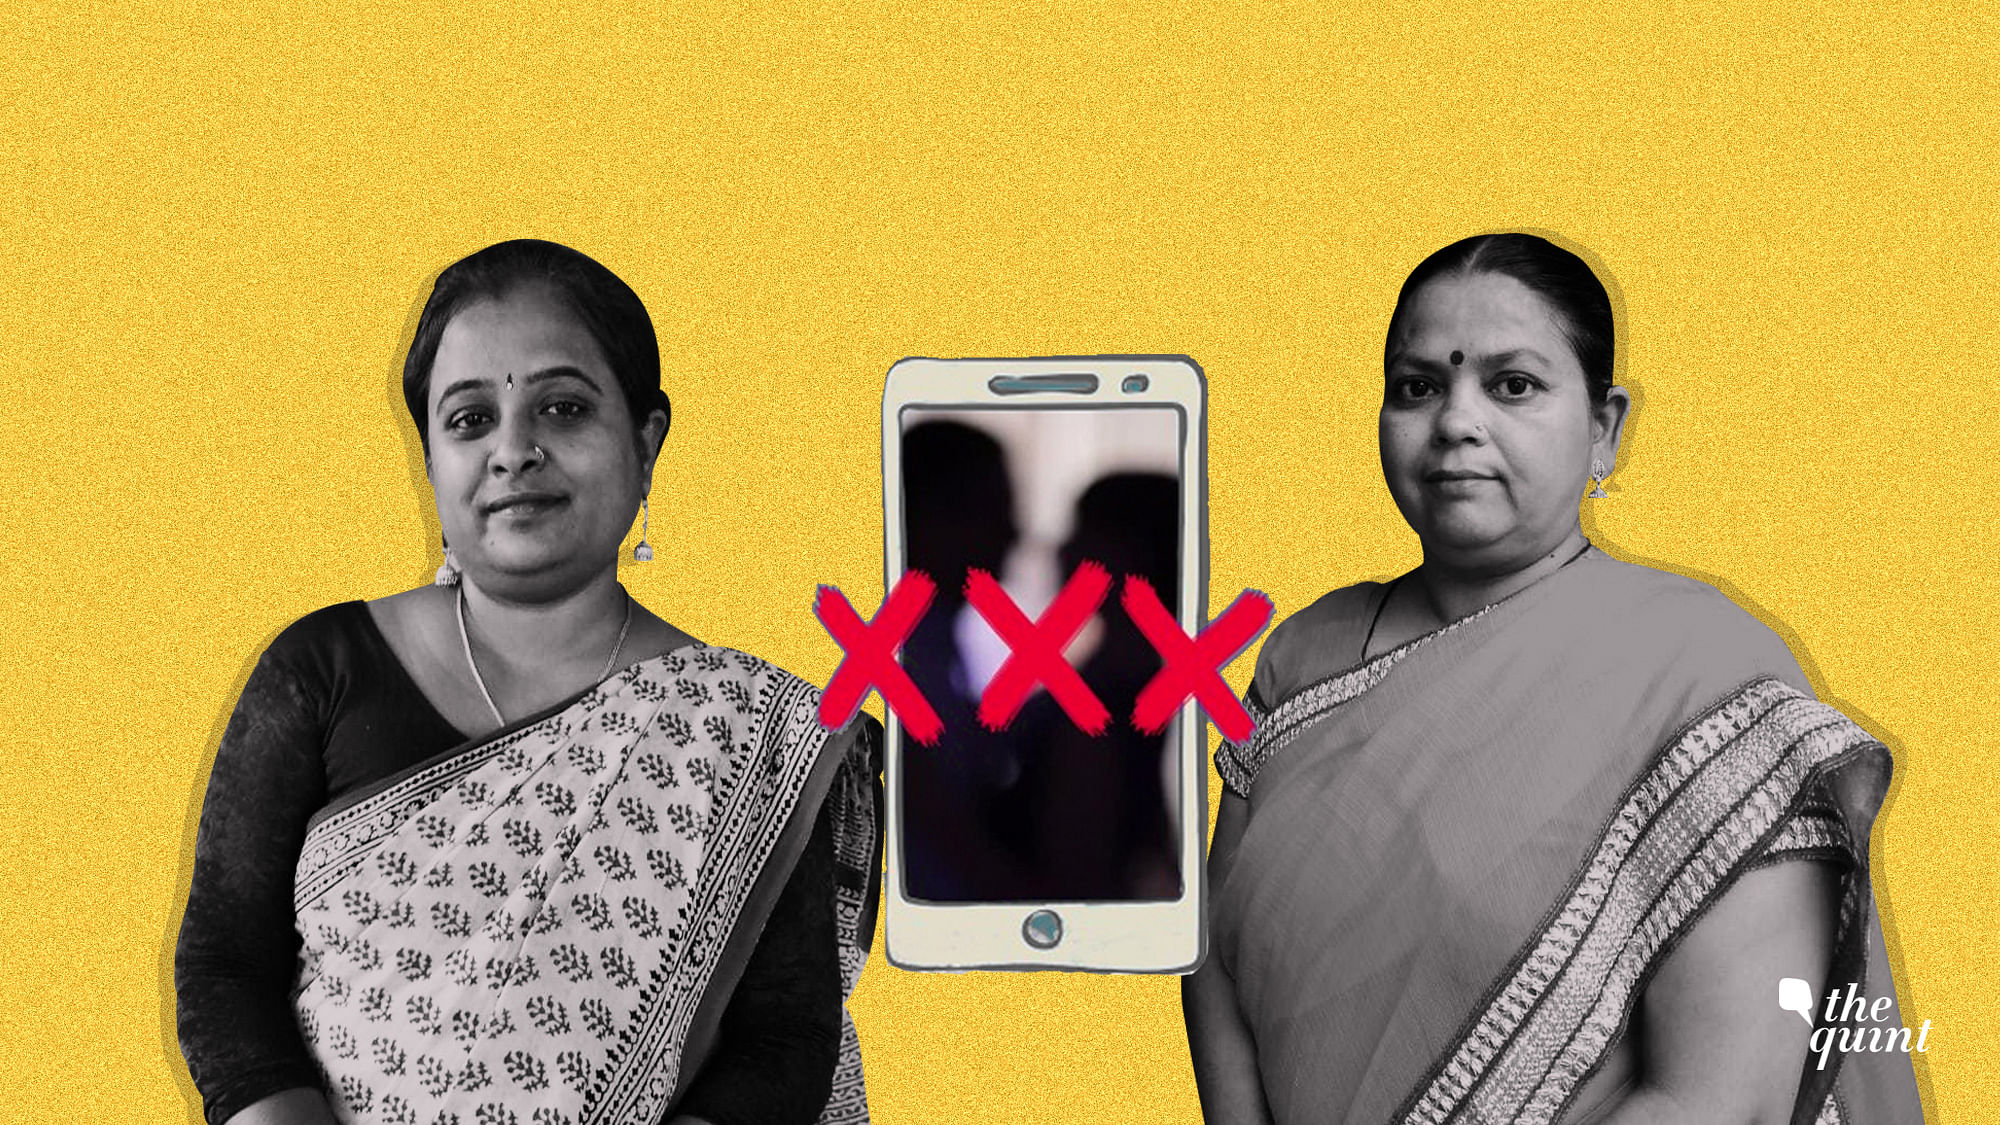 In WhatsApp groups for journalists, men would send porn, morphed photos, and make sexist jokes.